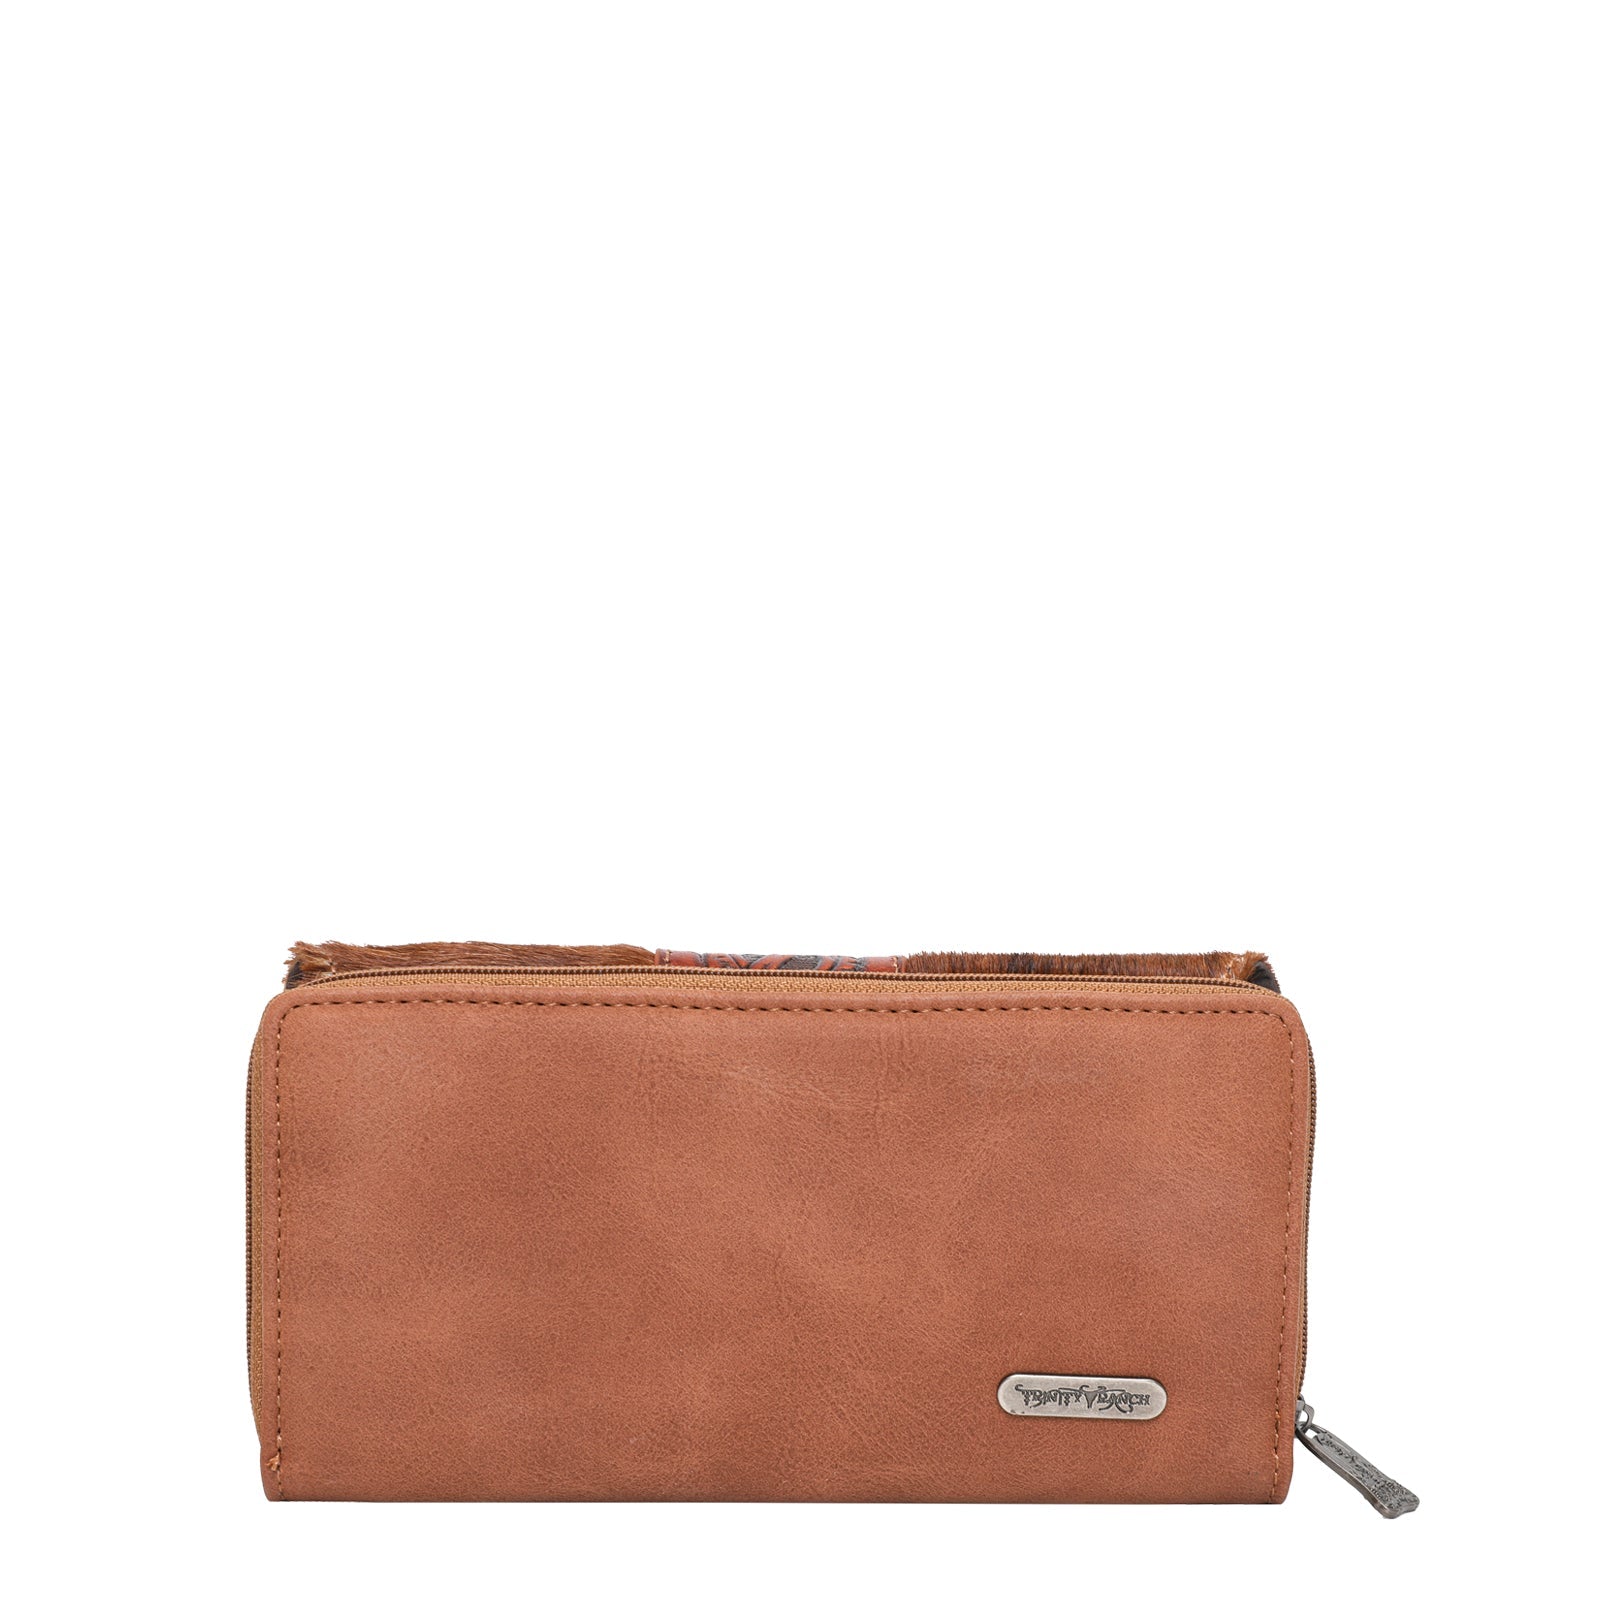 Trinity Ranch Hair-On Cowhide Collection Wristlet Wallet - Cowgirl Wear